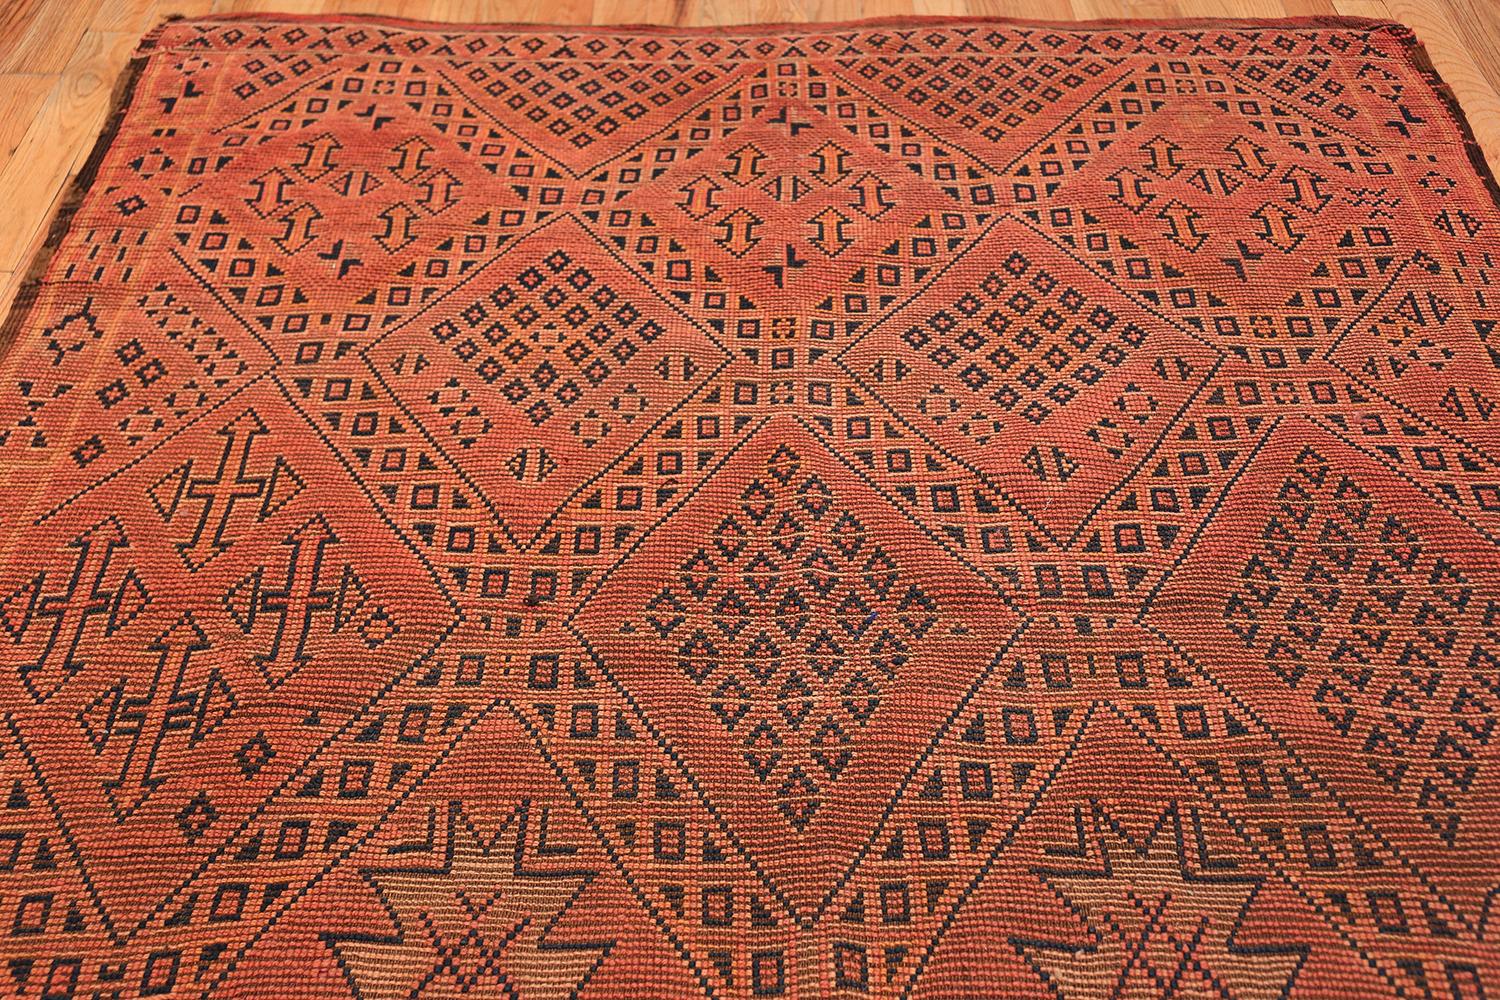 Hand-Knotted Vintage Gallery Size Double Sided Red Berber Moroccan Rug. Size: 6' x 12' 4